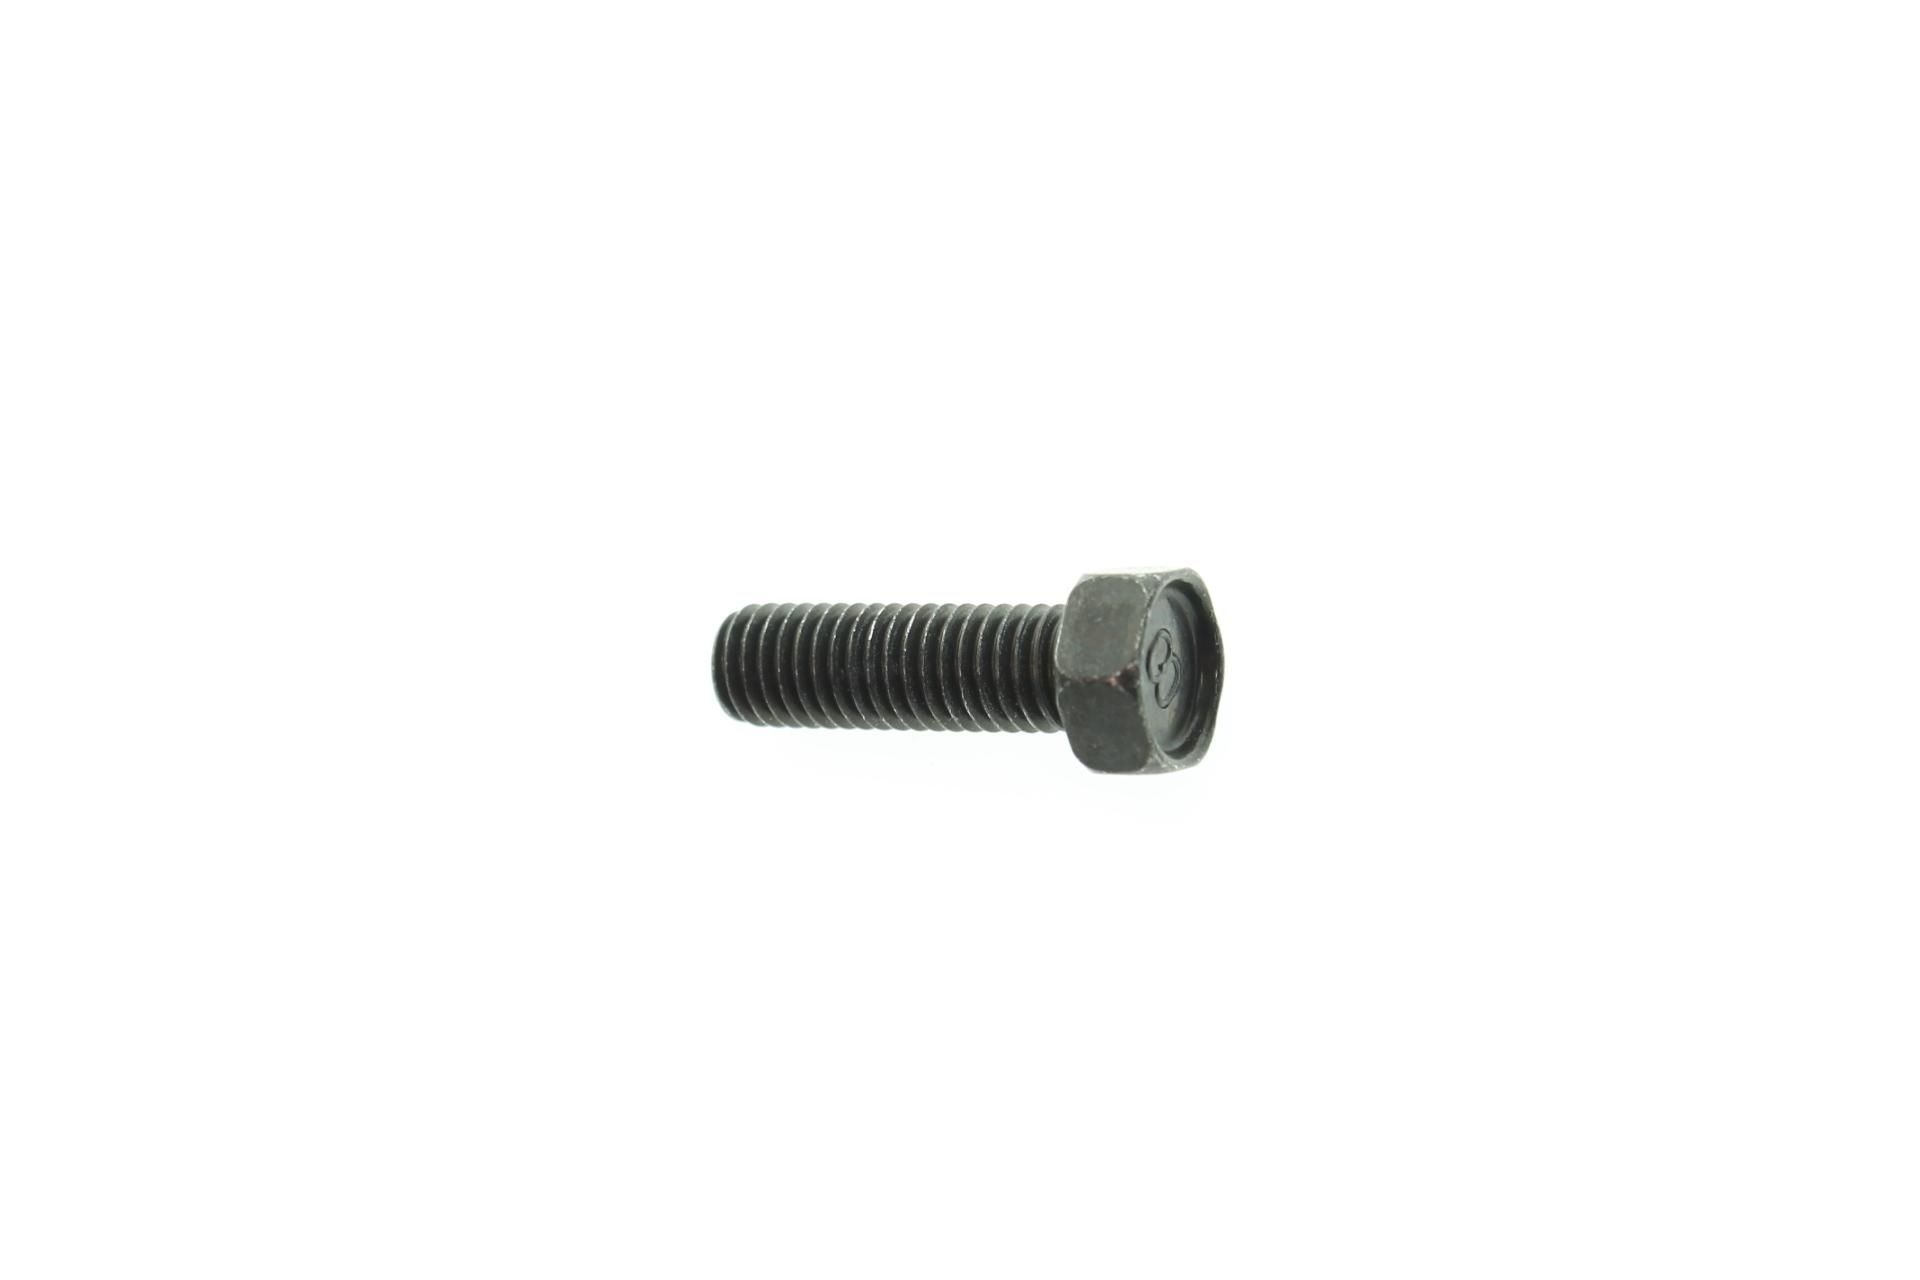 97027-08025-00 Superseded by 97017-08025-00 - BOLT